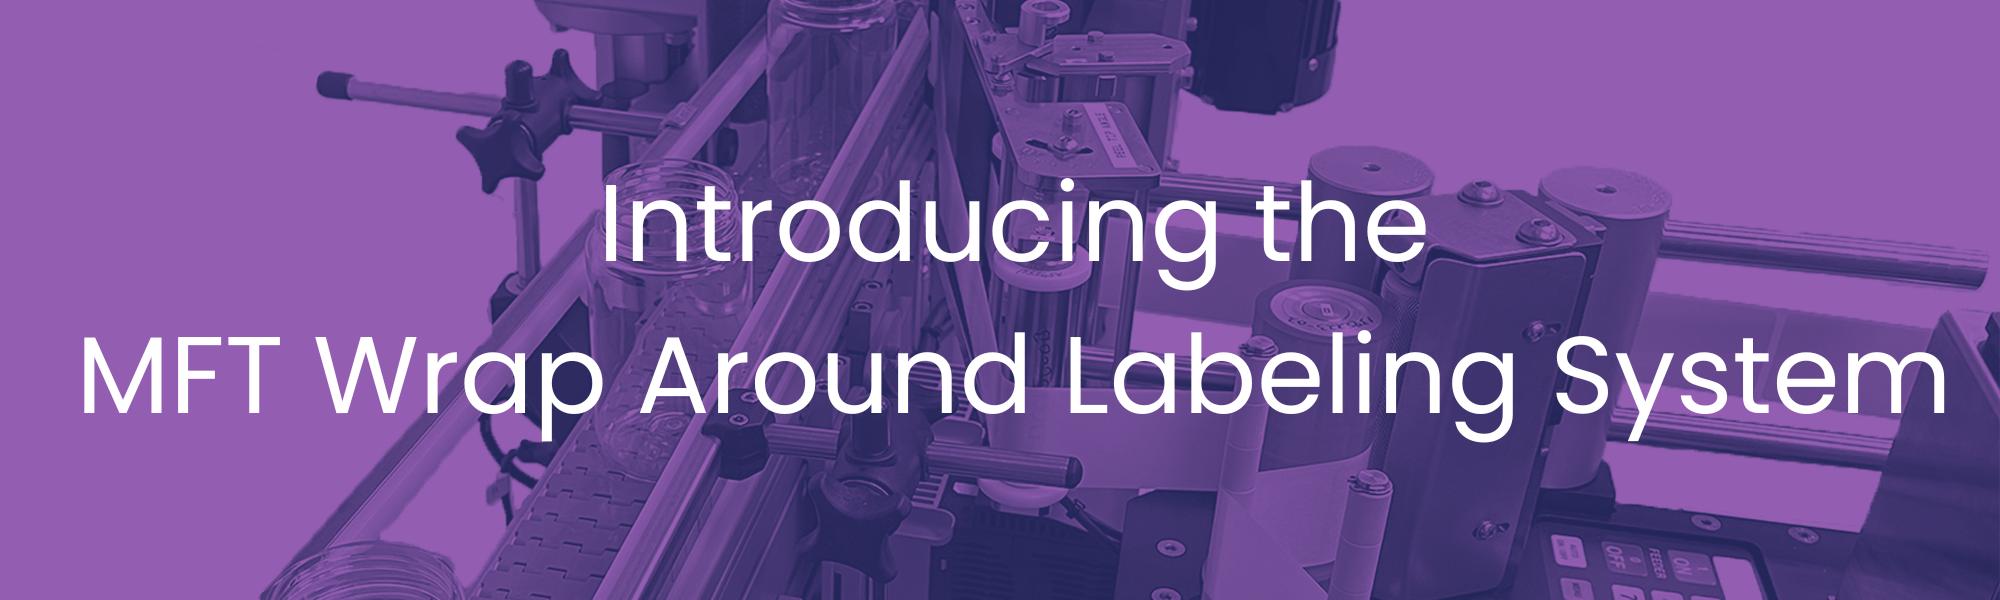 Introducing the MFT Wrap Around Labeling System